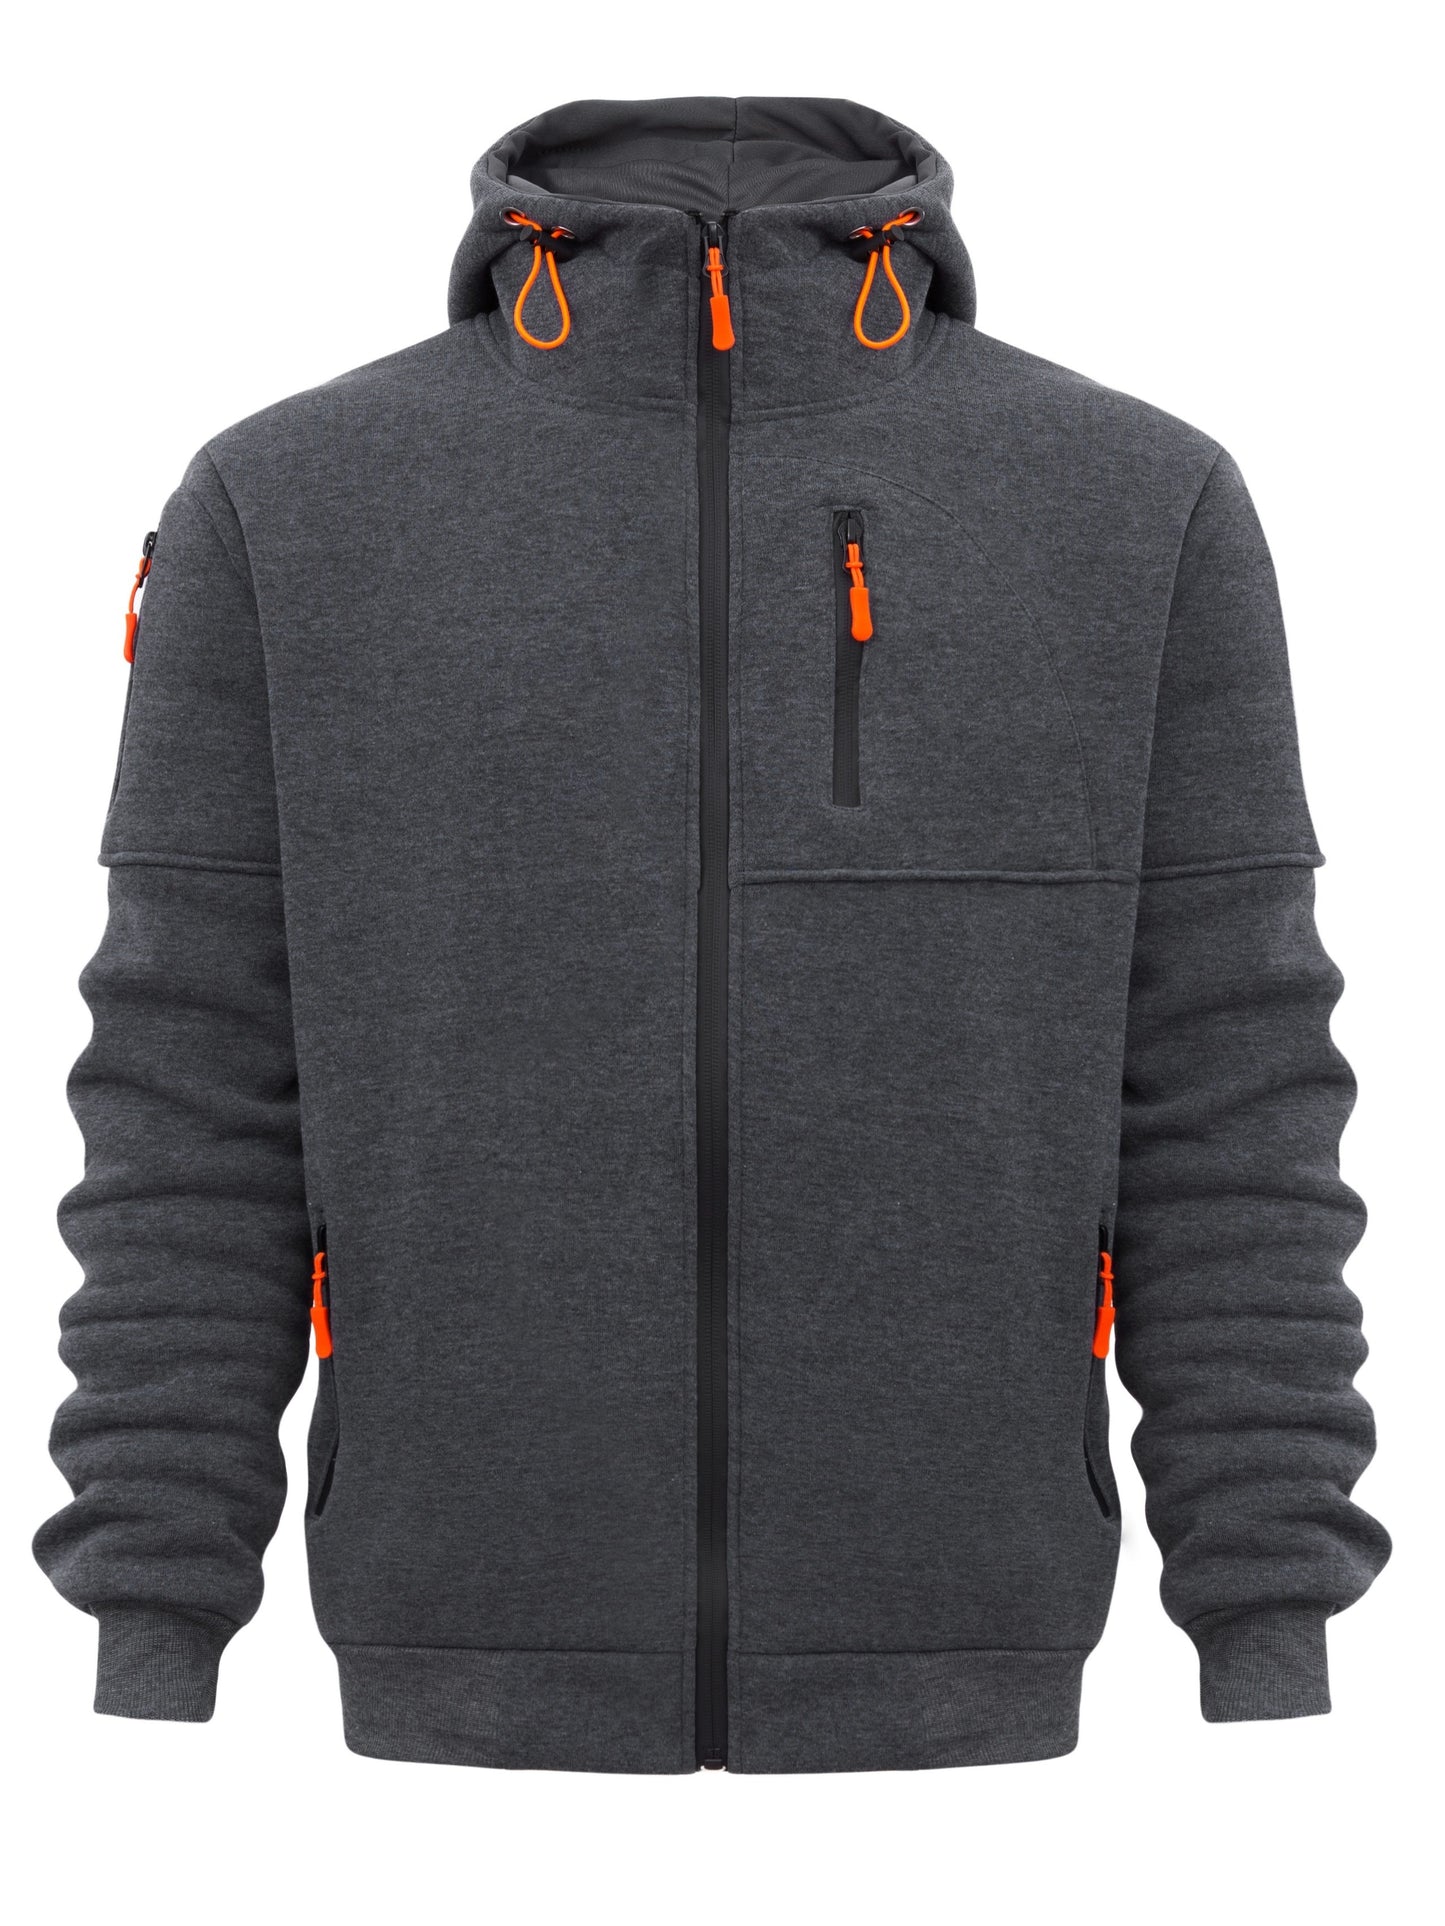 Men's Casual Long Sleeve Sports Hooded Jacket With Full Zip